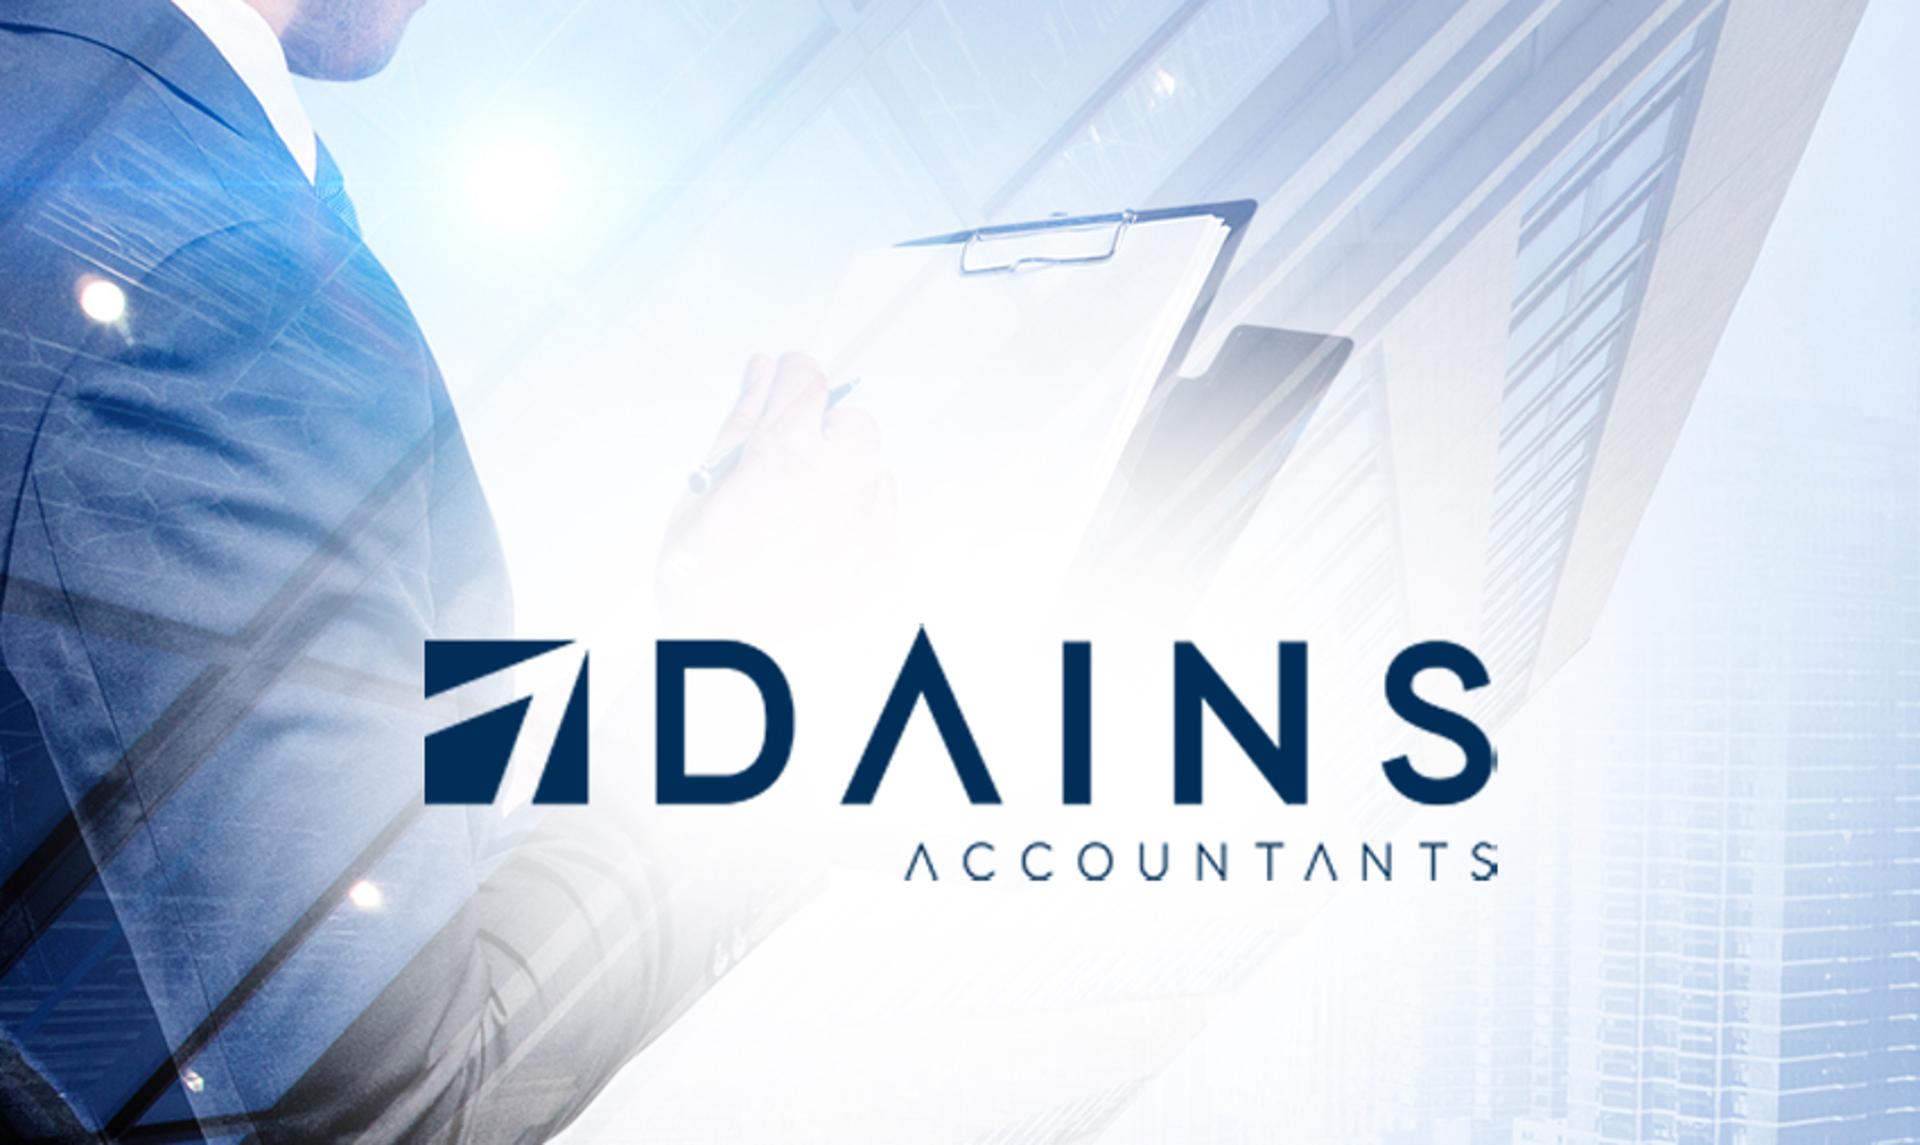 Dains Accountants confirms two acquisitions